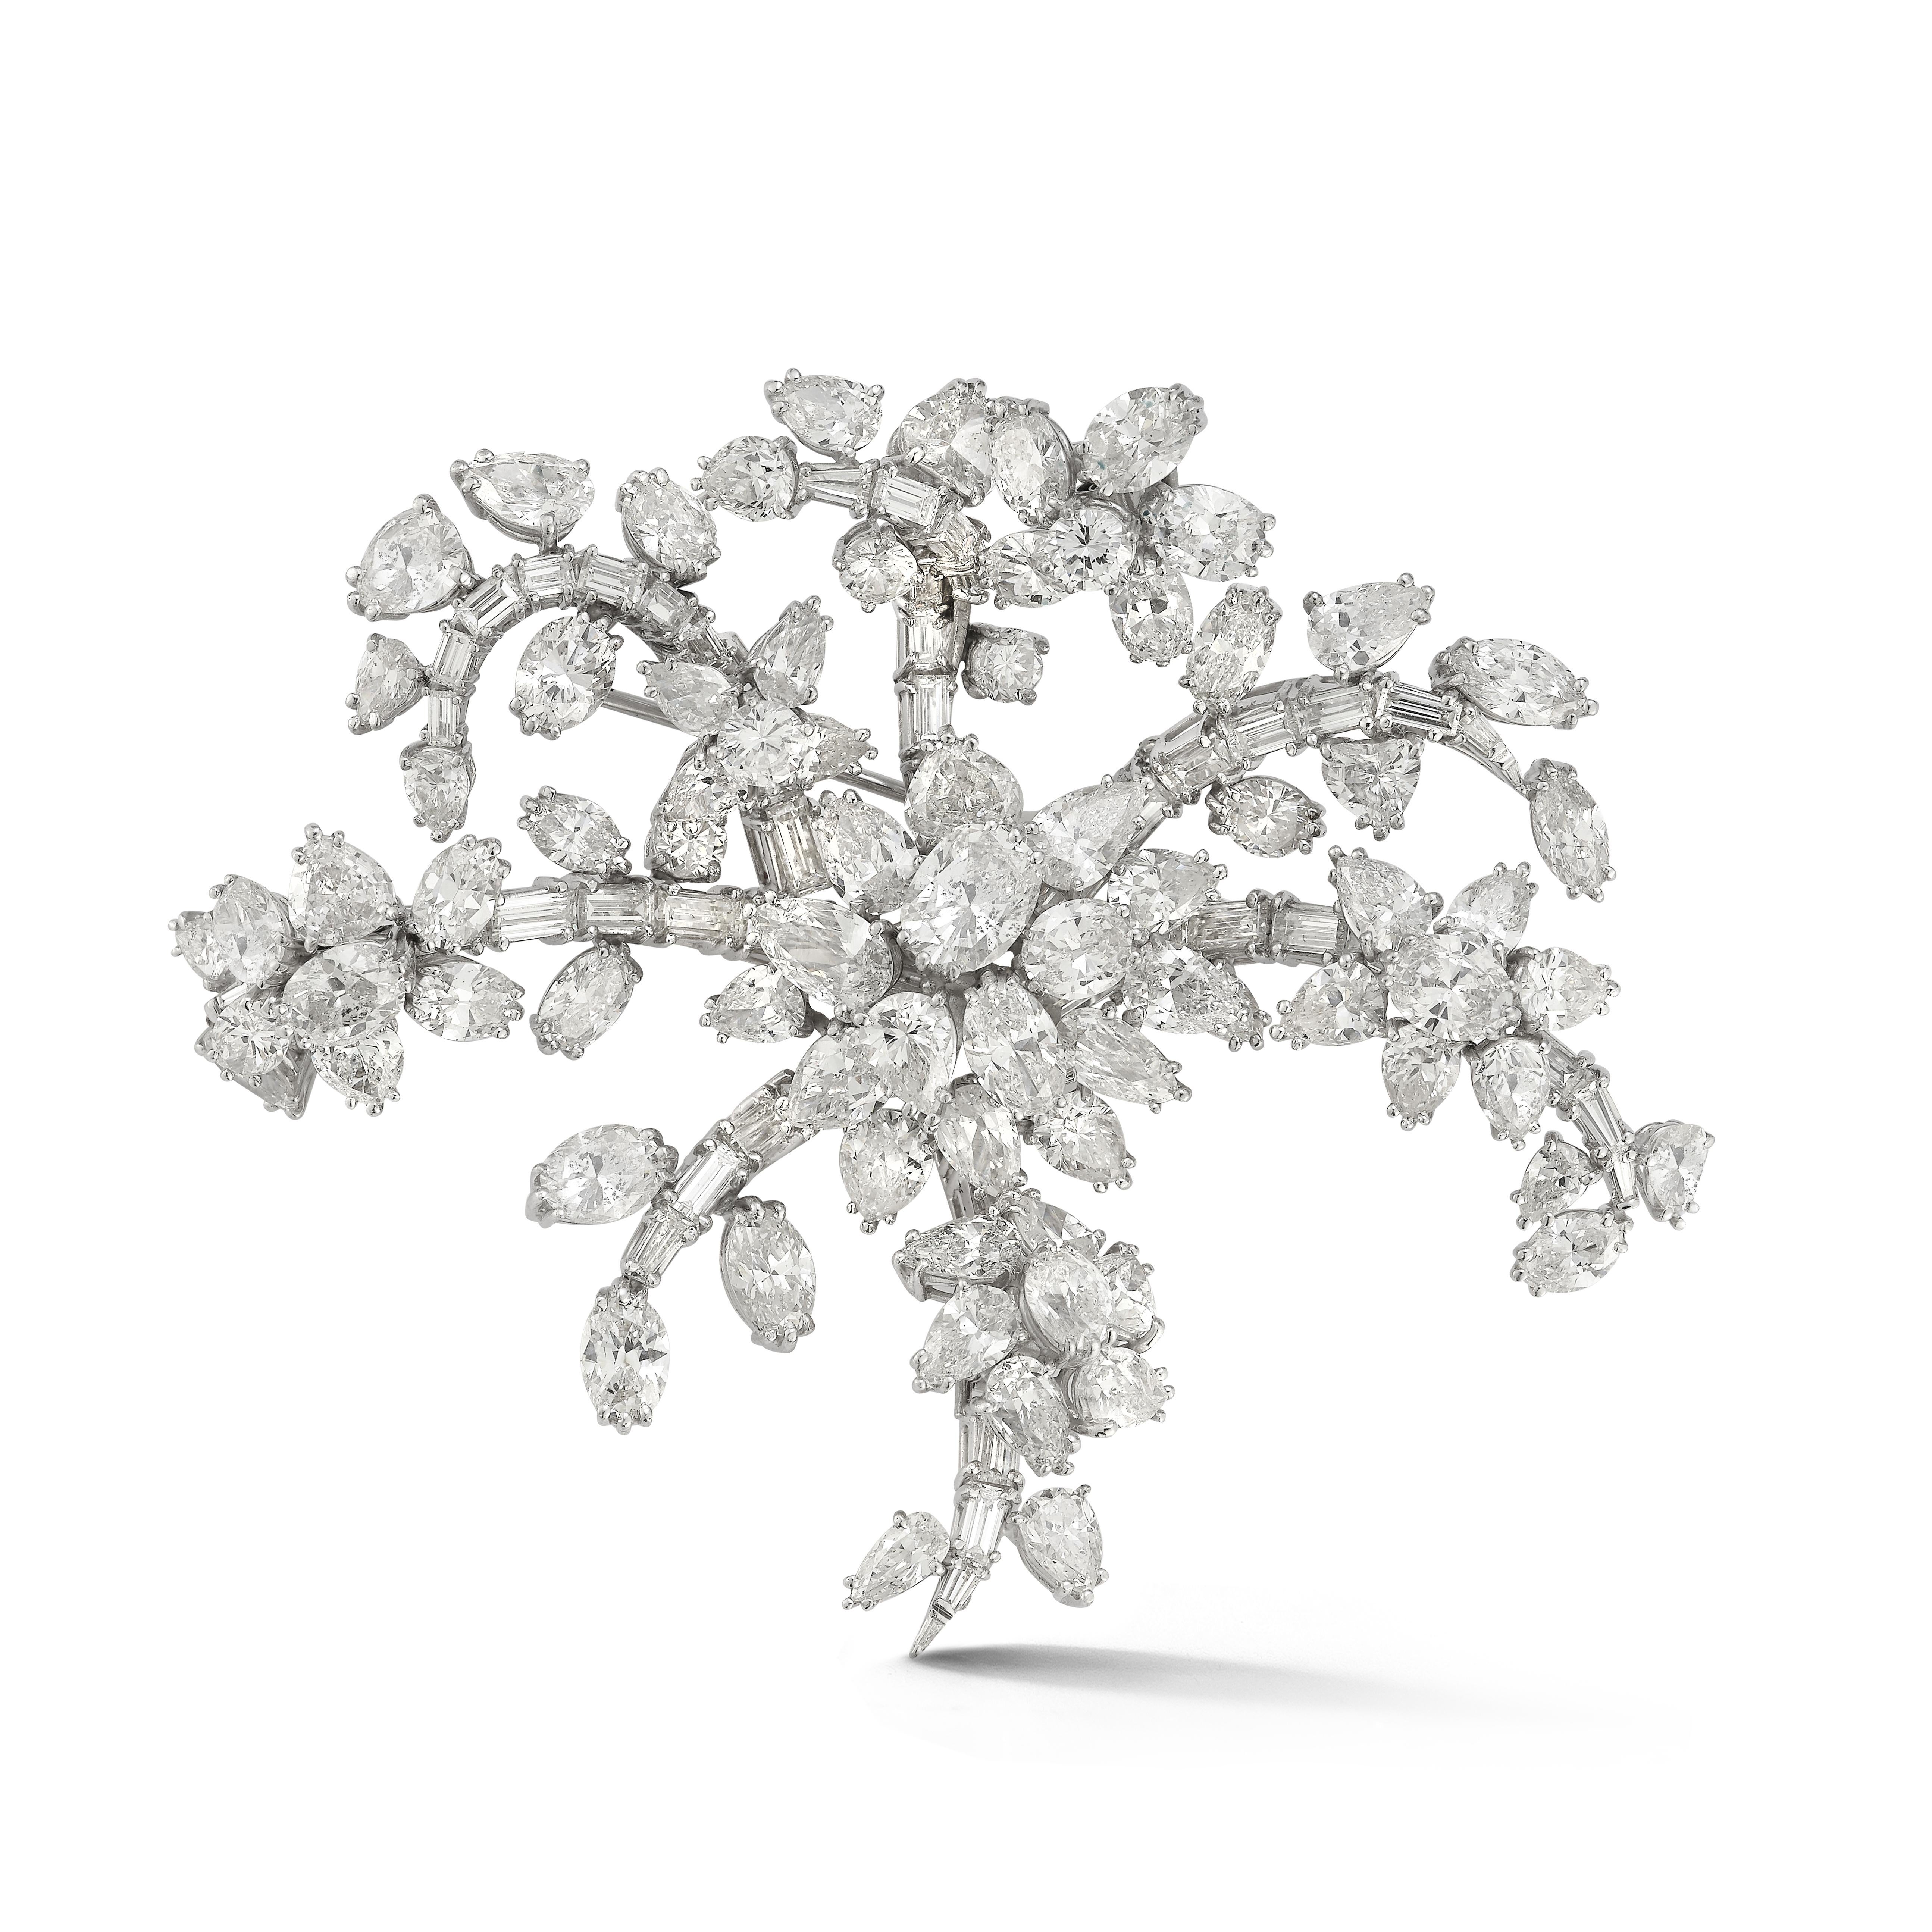 Large Size Diamond En Tremblant Brooch

 - A platinum brooch set with approximately 130 diamonds consisting of an assortment of approximately 35 pear cut diamonds, approximately 25 oval cut diamonds, & approximately 70 heart shape, round cut,